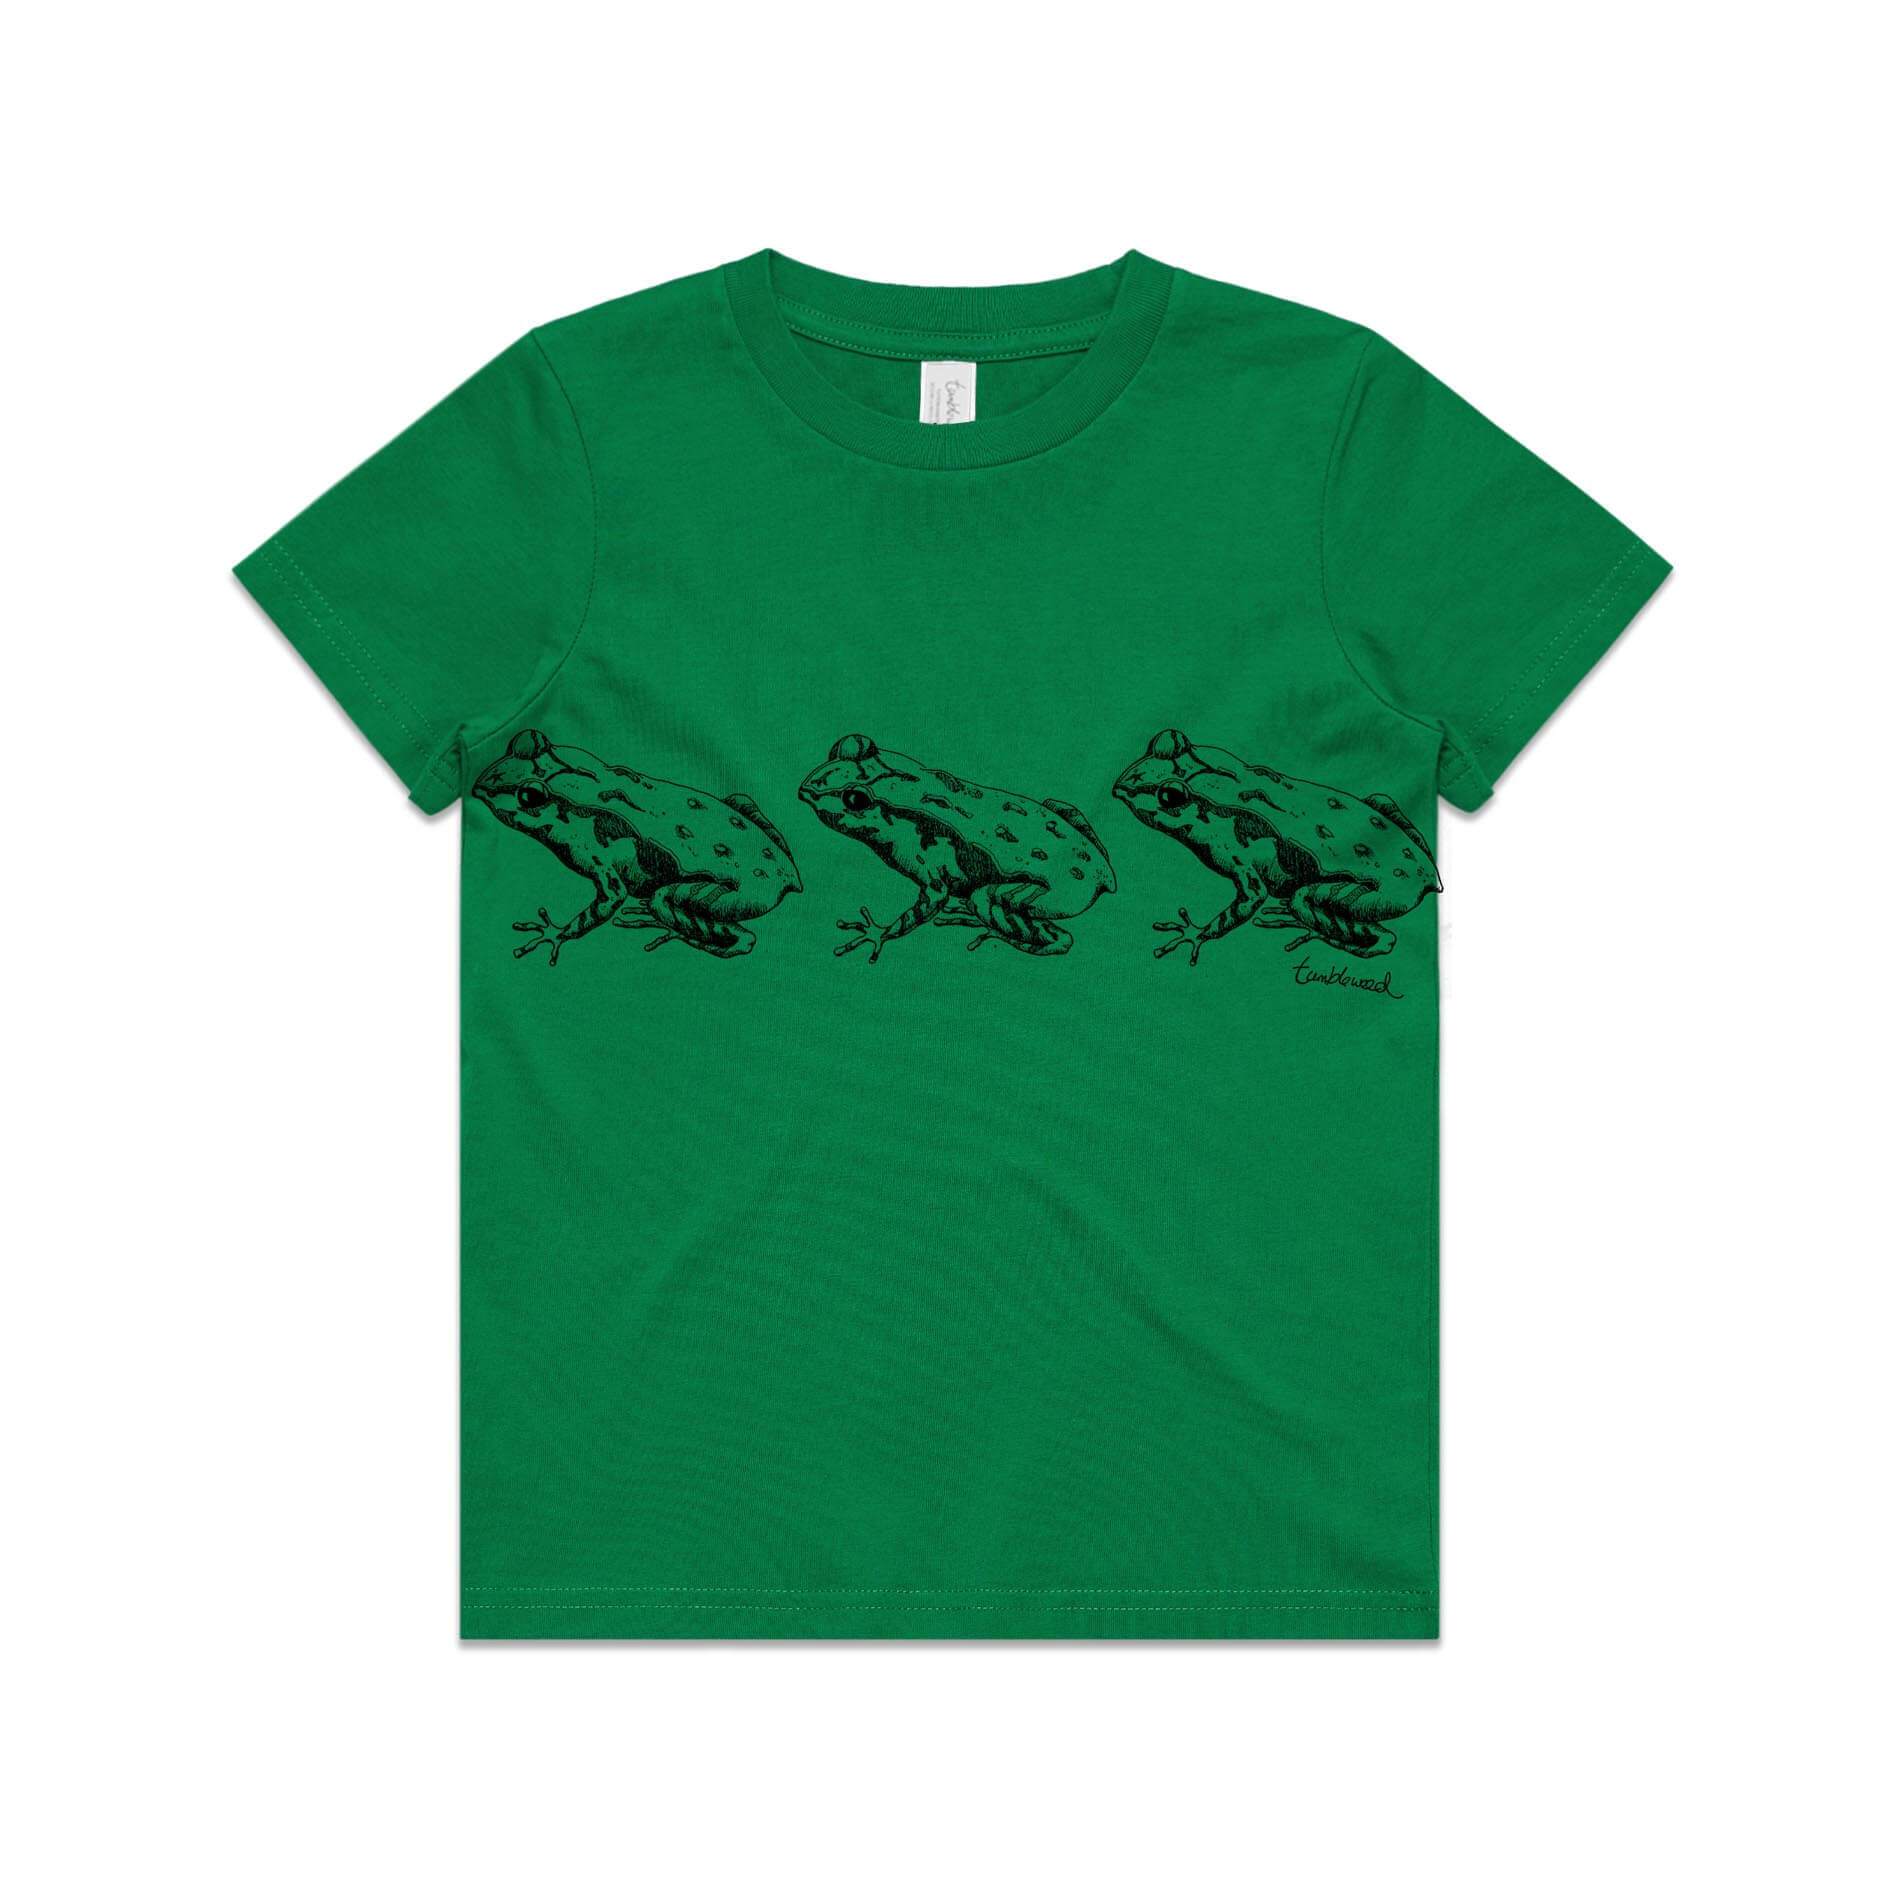 Green, cotton kids' t-shirt with screen printed Kids Archey's Frog design.